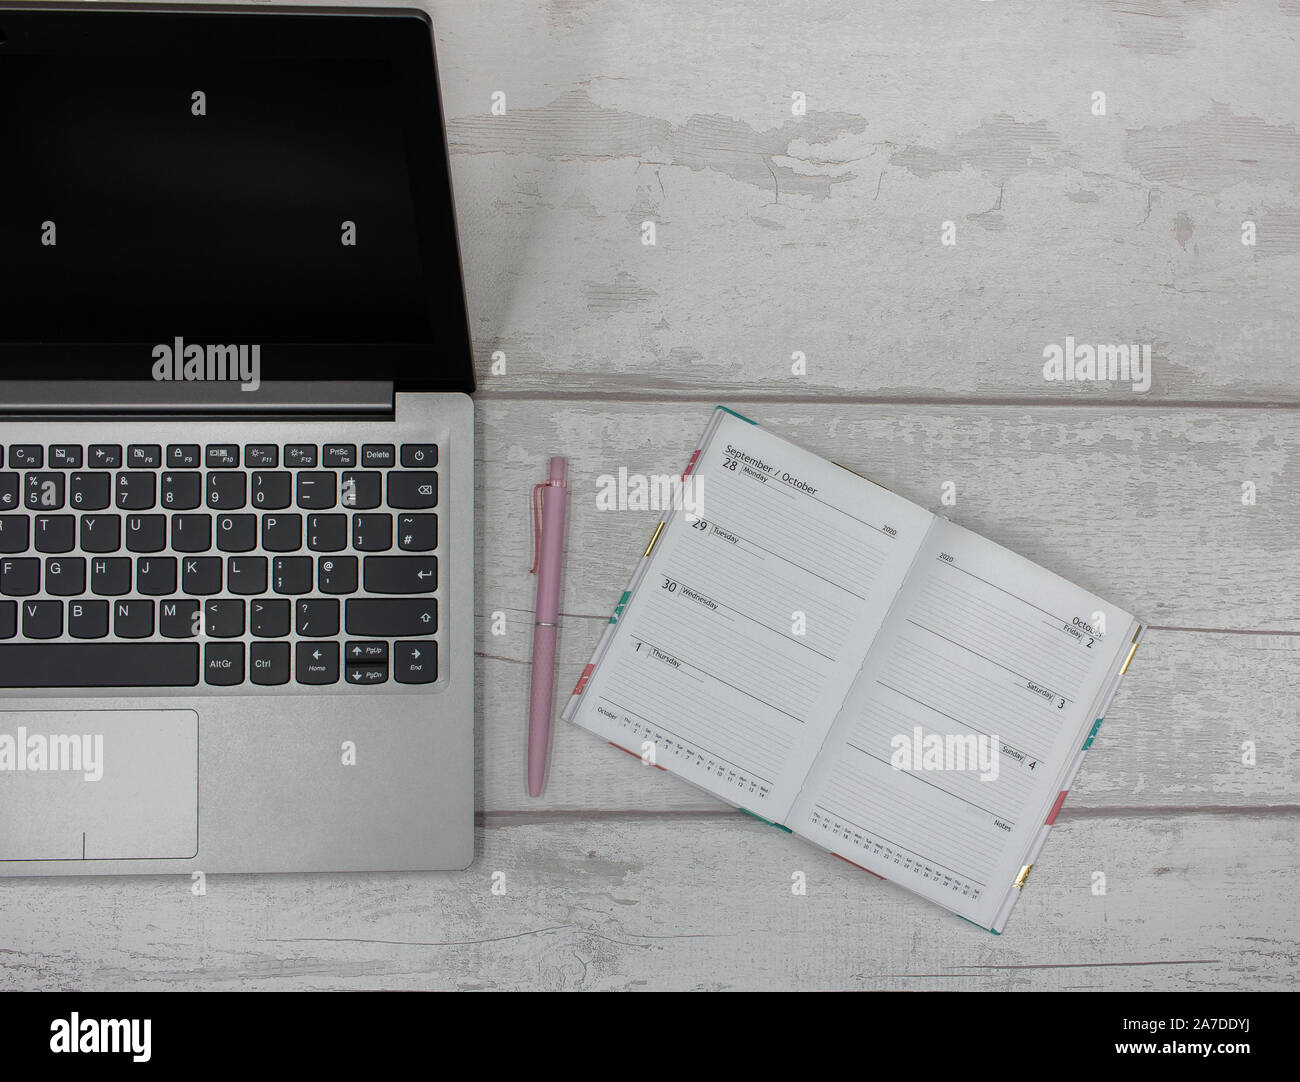 Top View of Laptop with Organizer Diary and Pink Pen on a Clean White Wooden Table Stock Photo